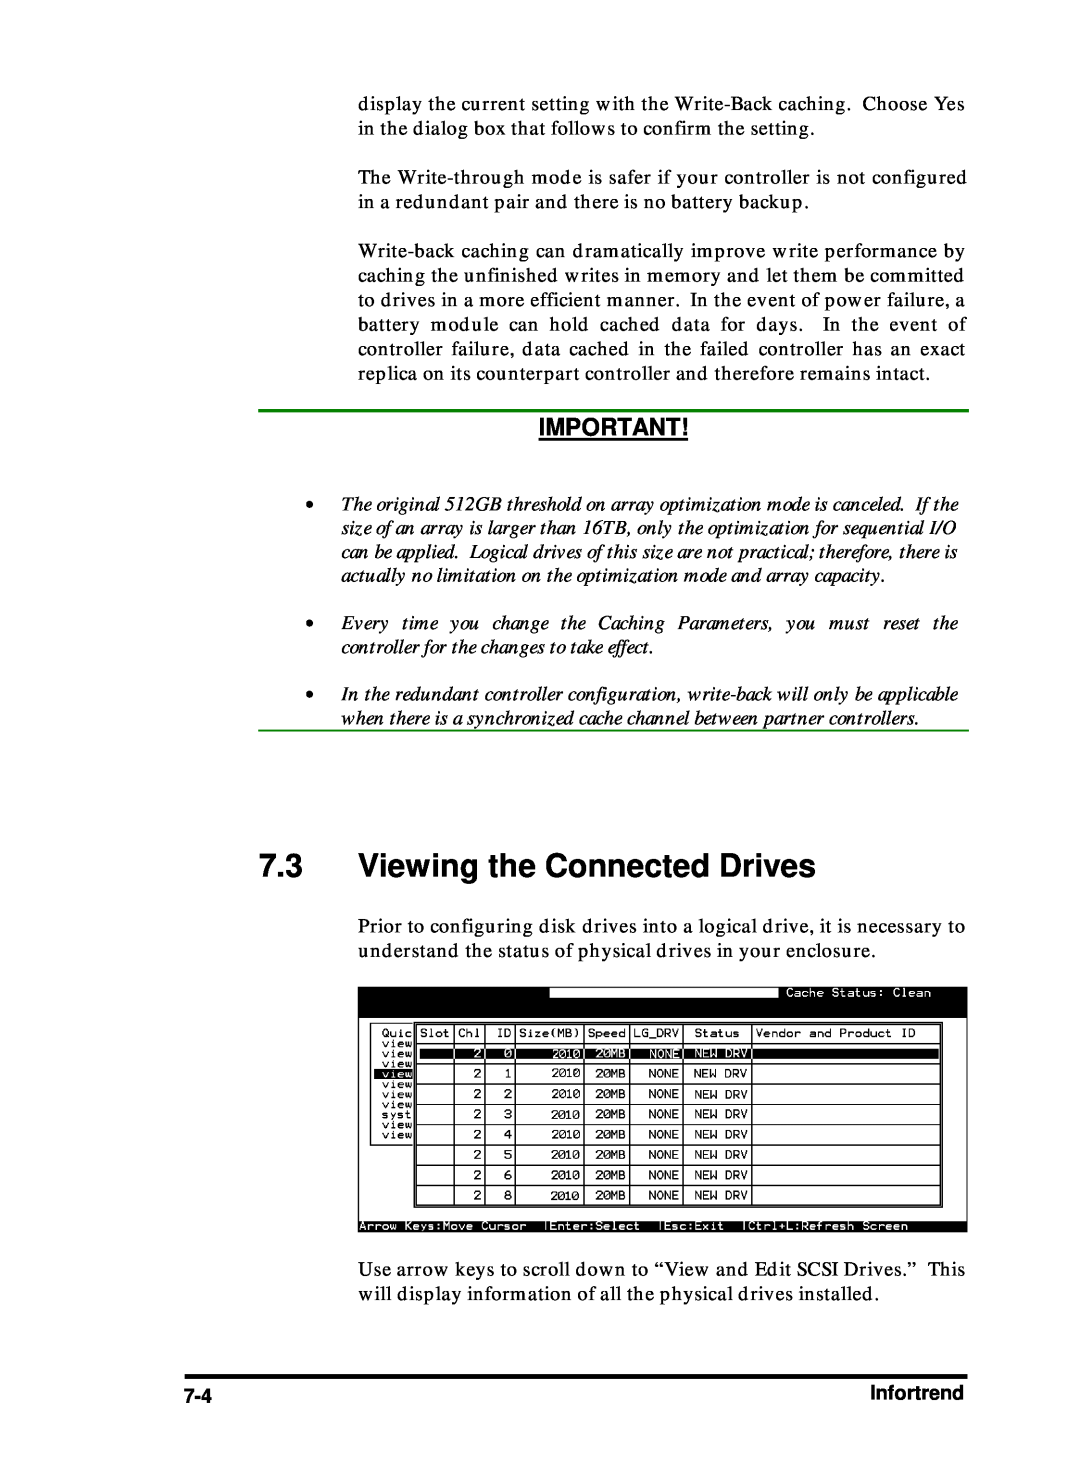 Compaq Infortrend manual Viewing the Connected Drives 